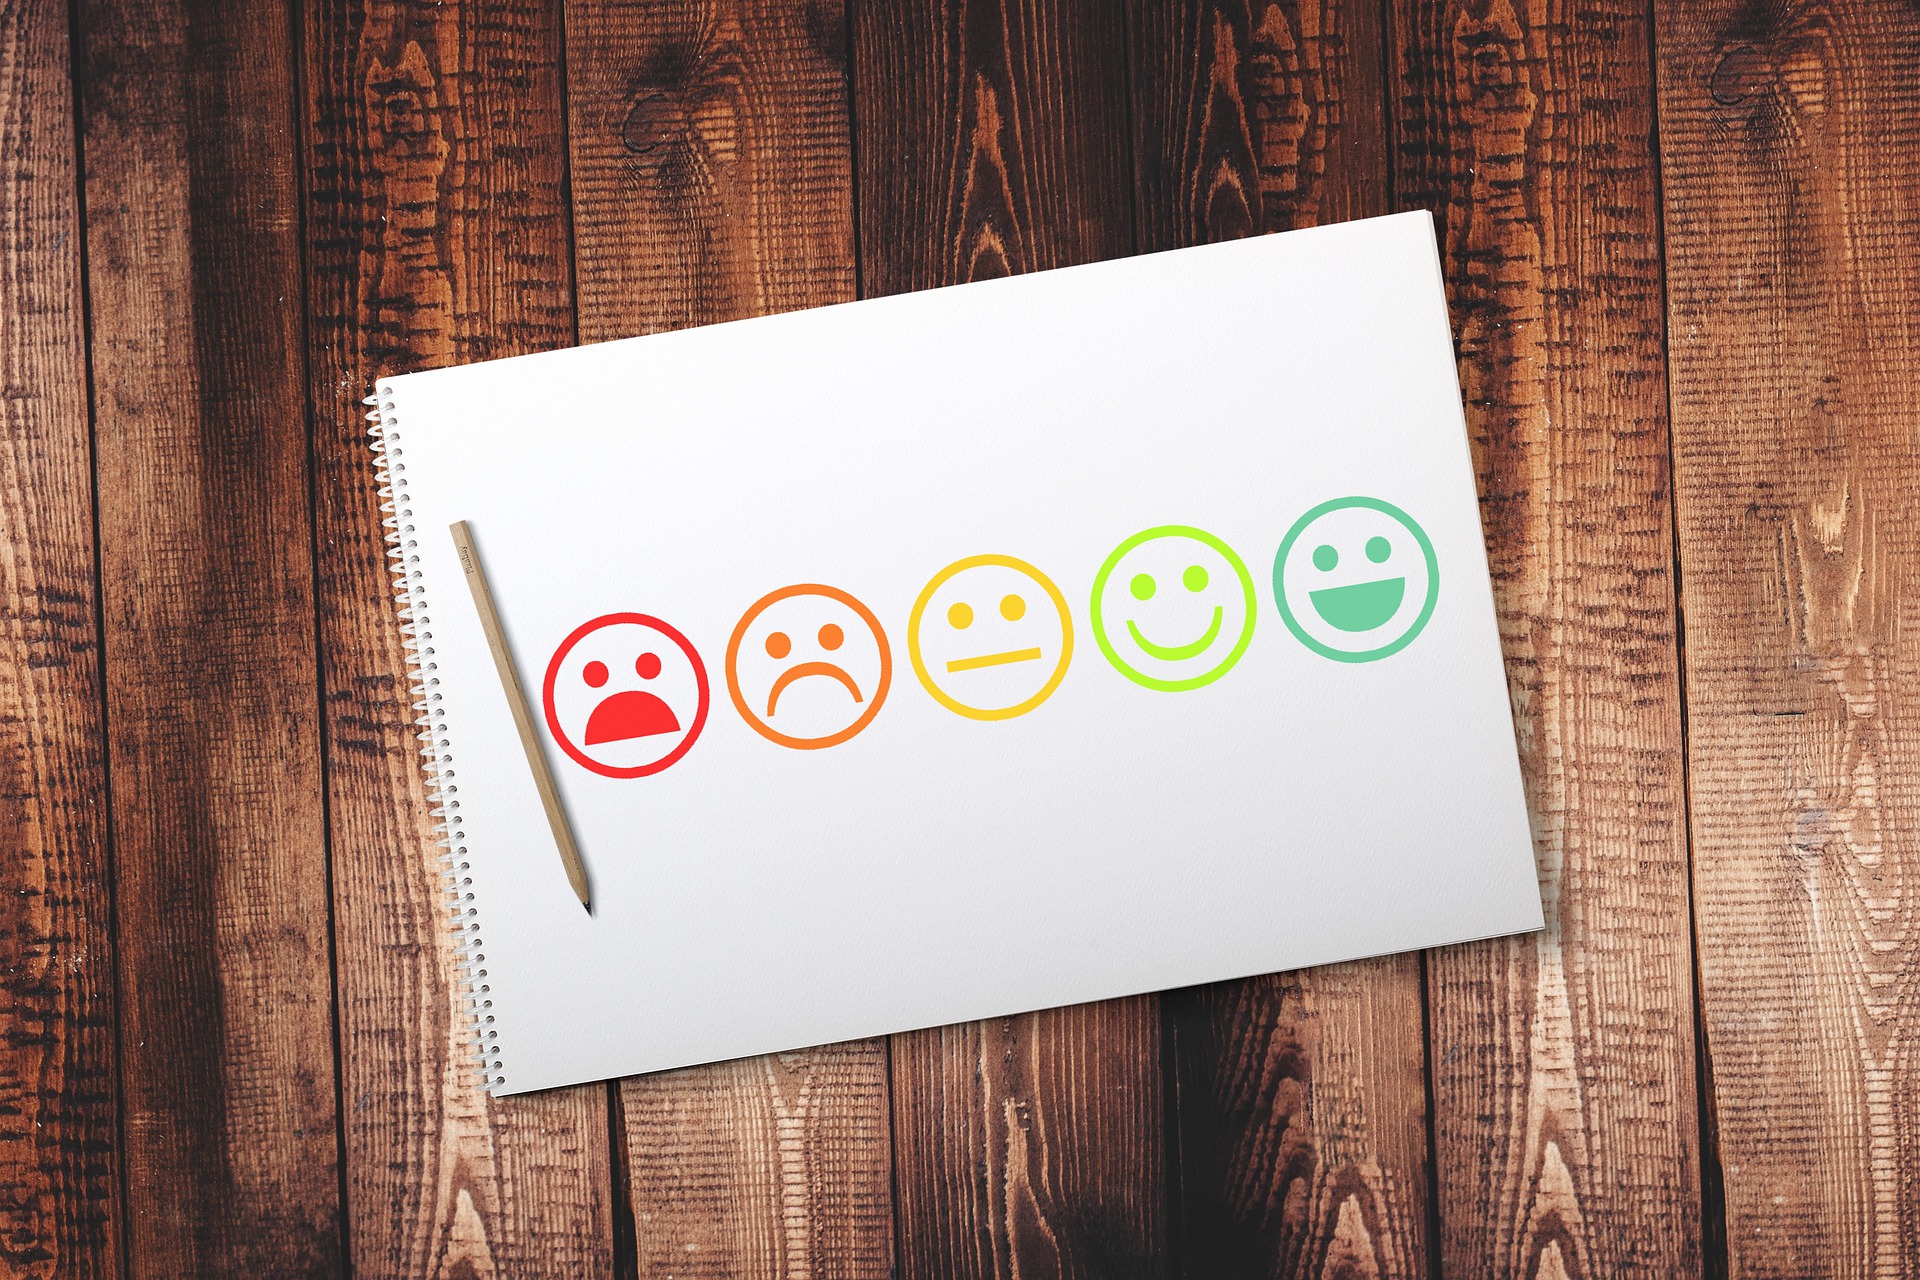 A notepad with feedback smiley faces drawn on it